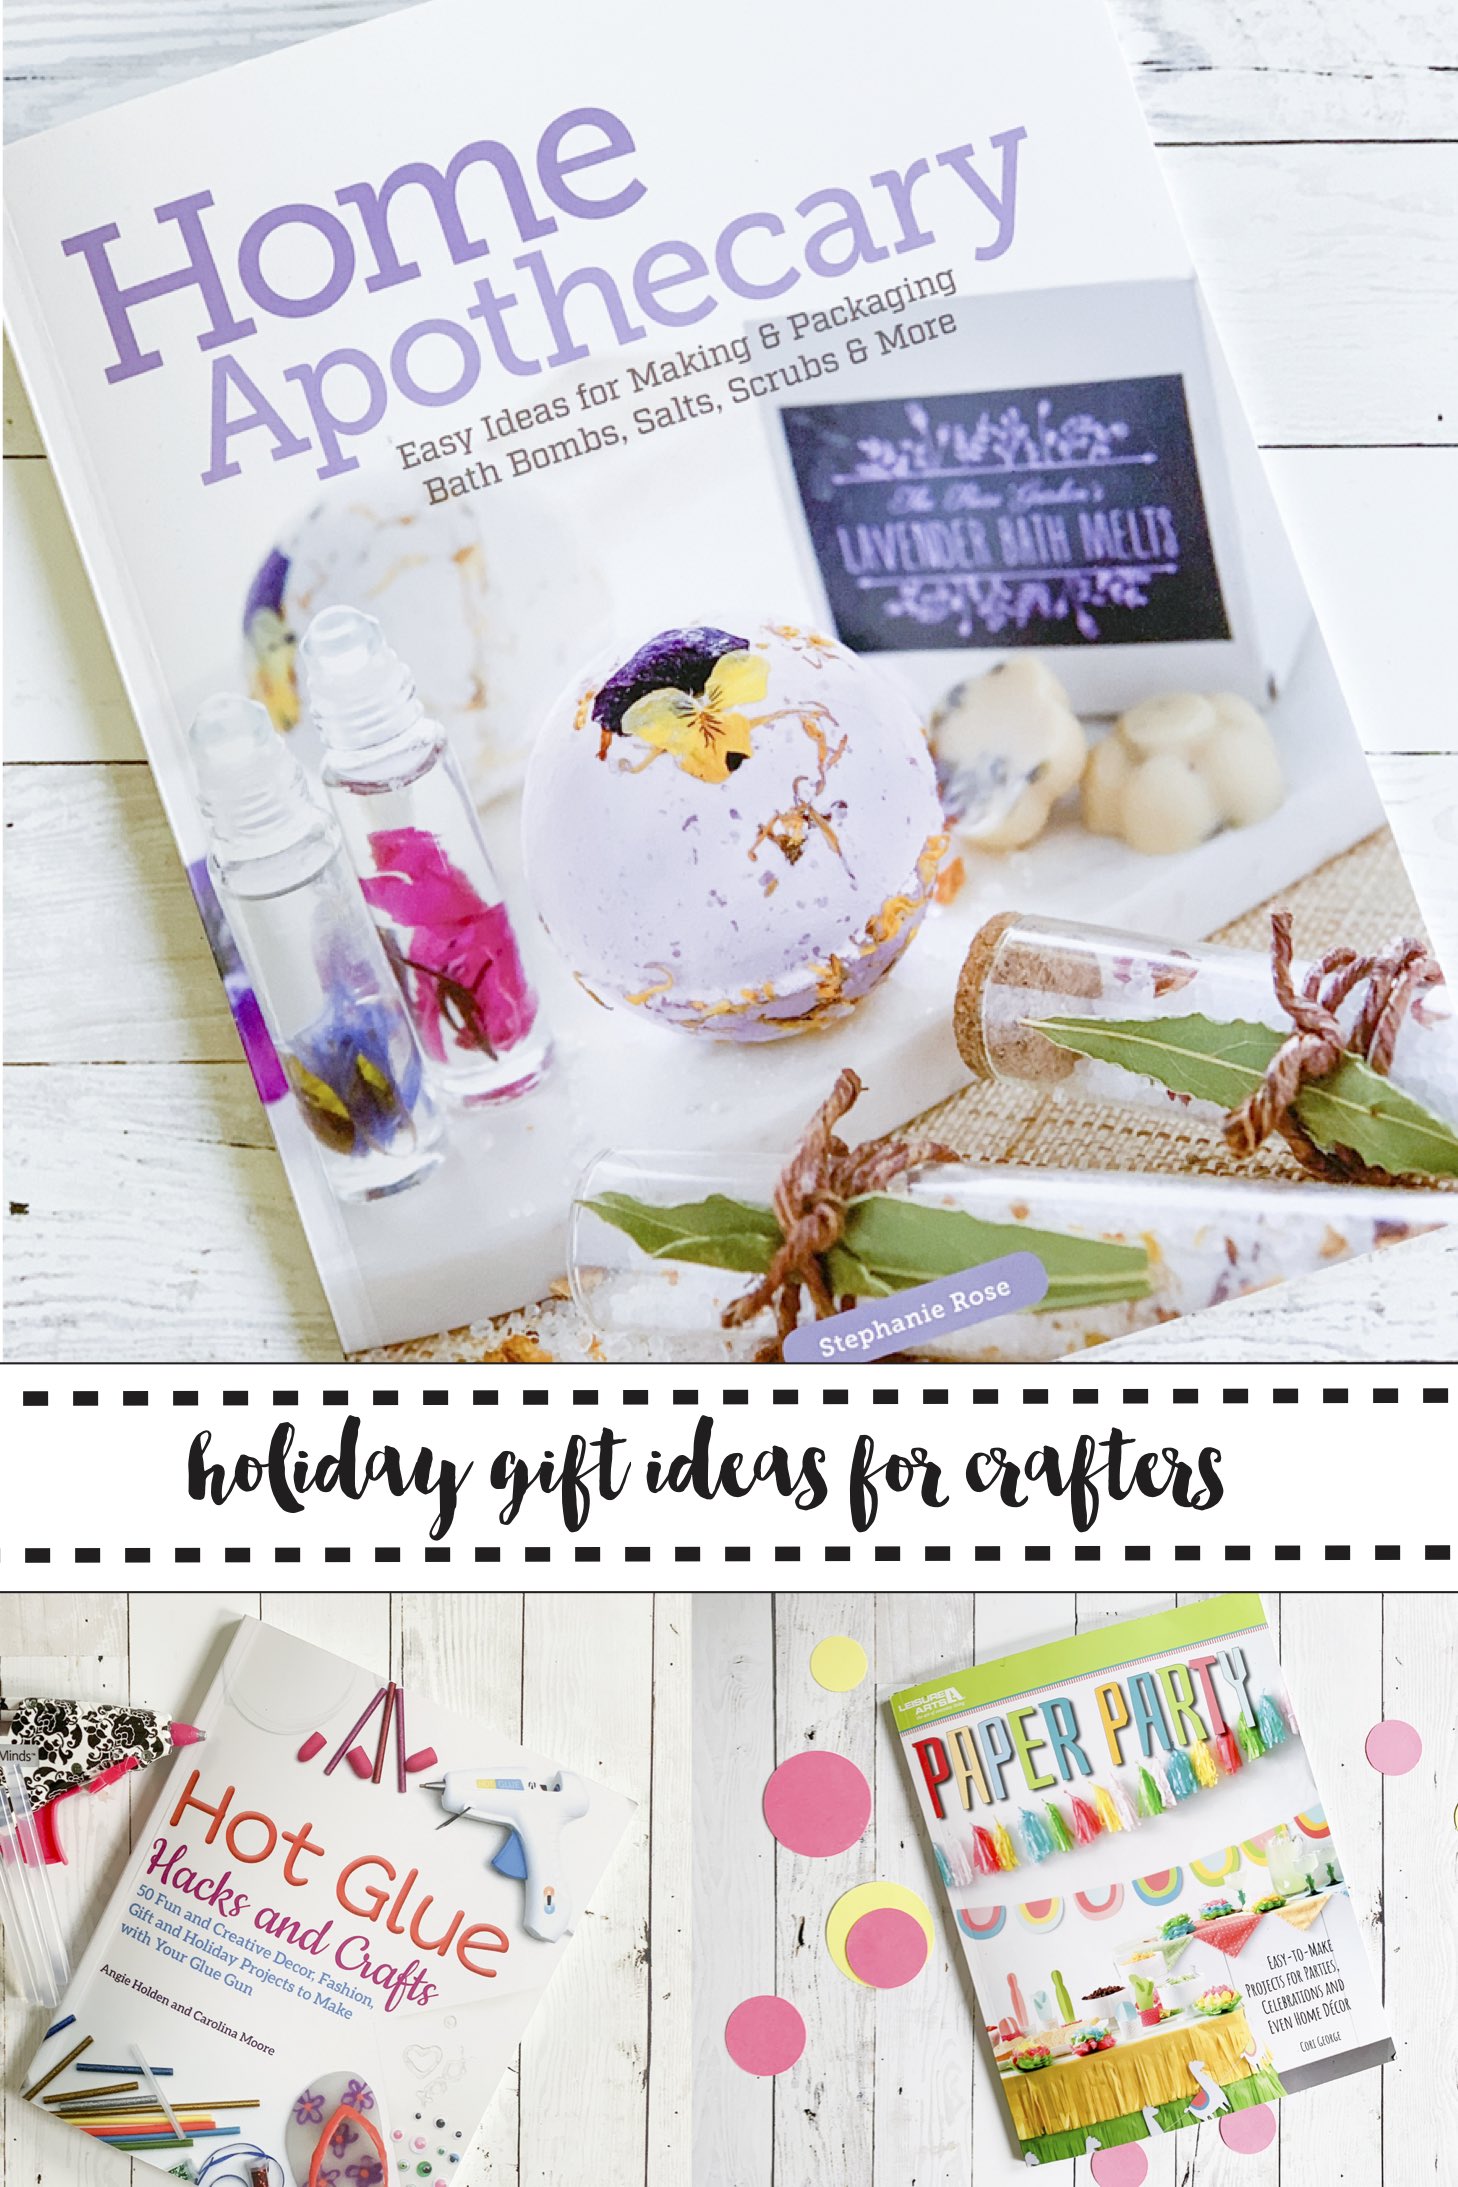 Home Apothecary Book Paper Party Book Glue Gun Hacks and Crafts Book